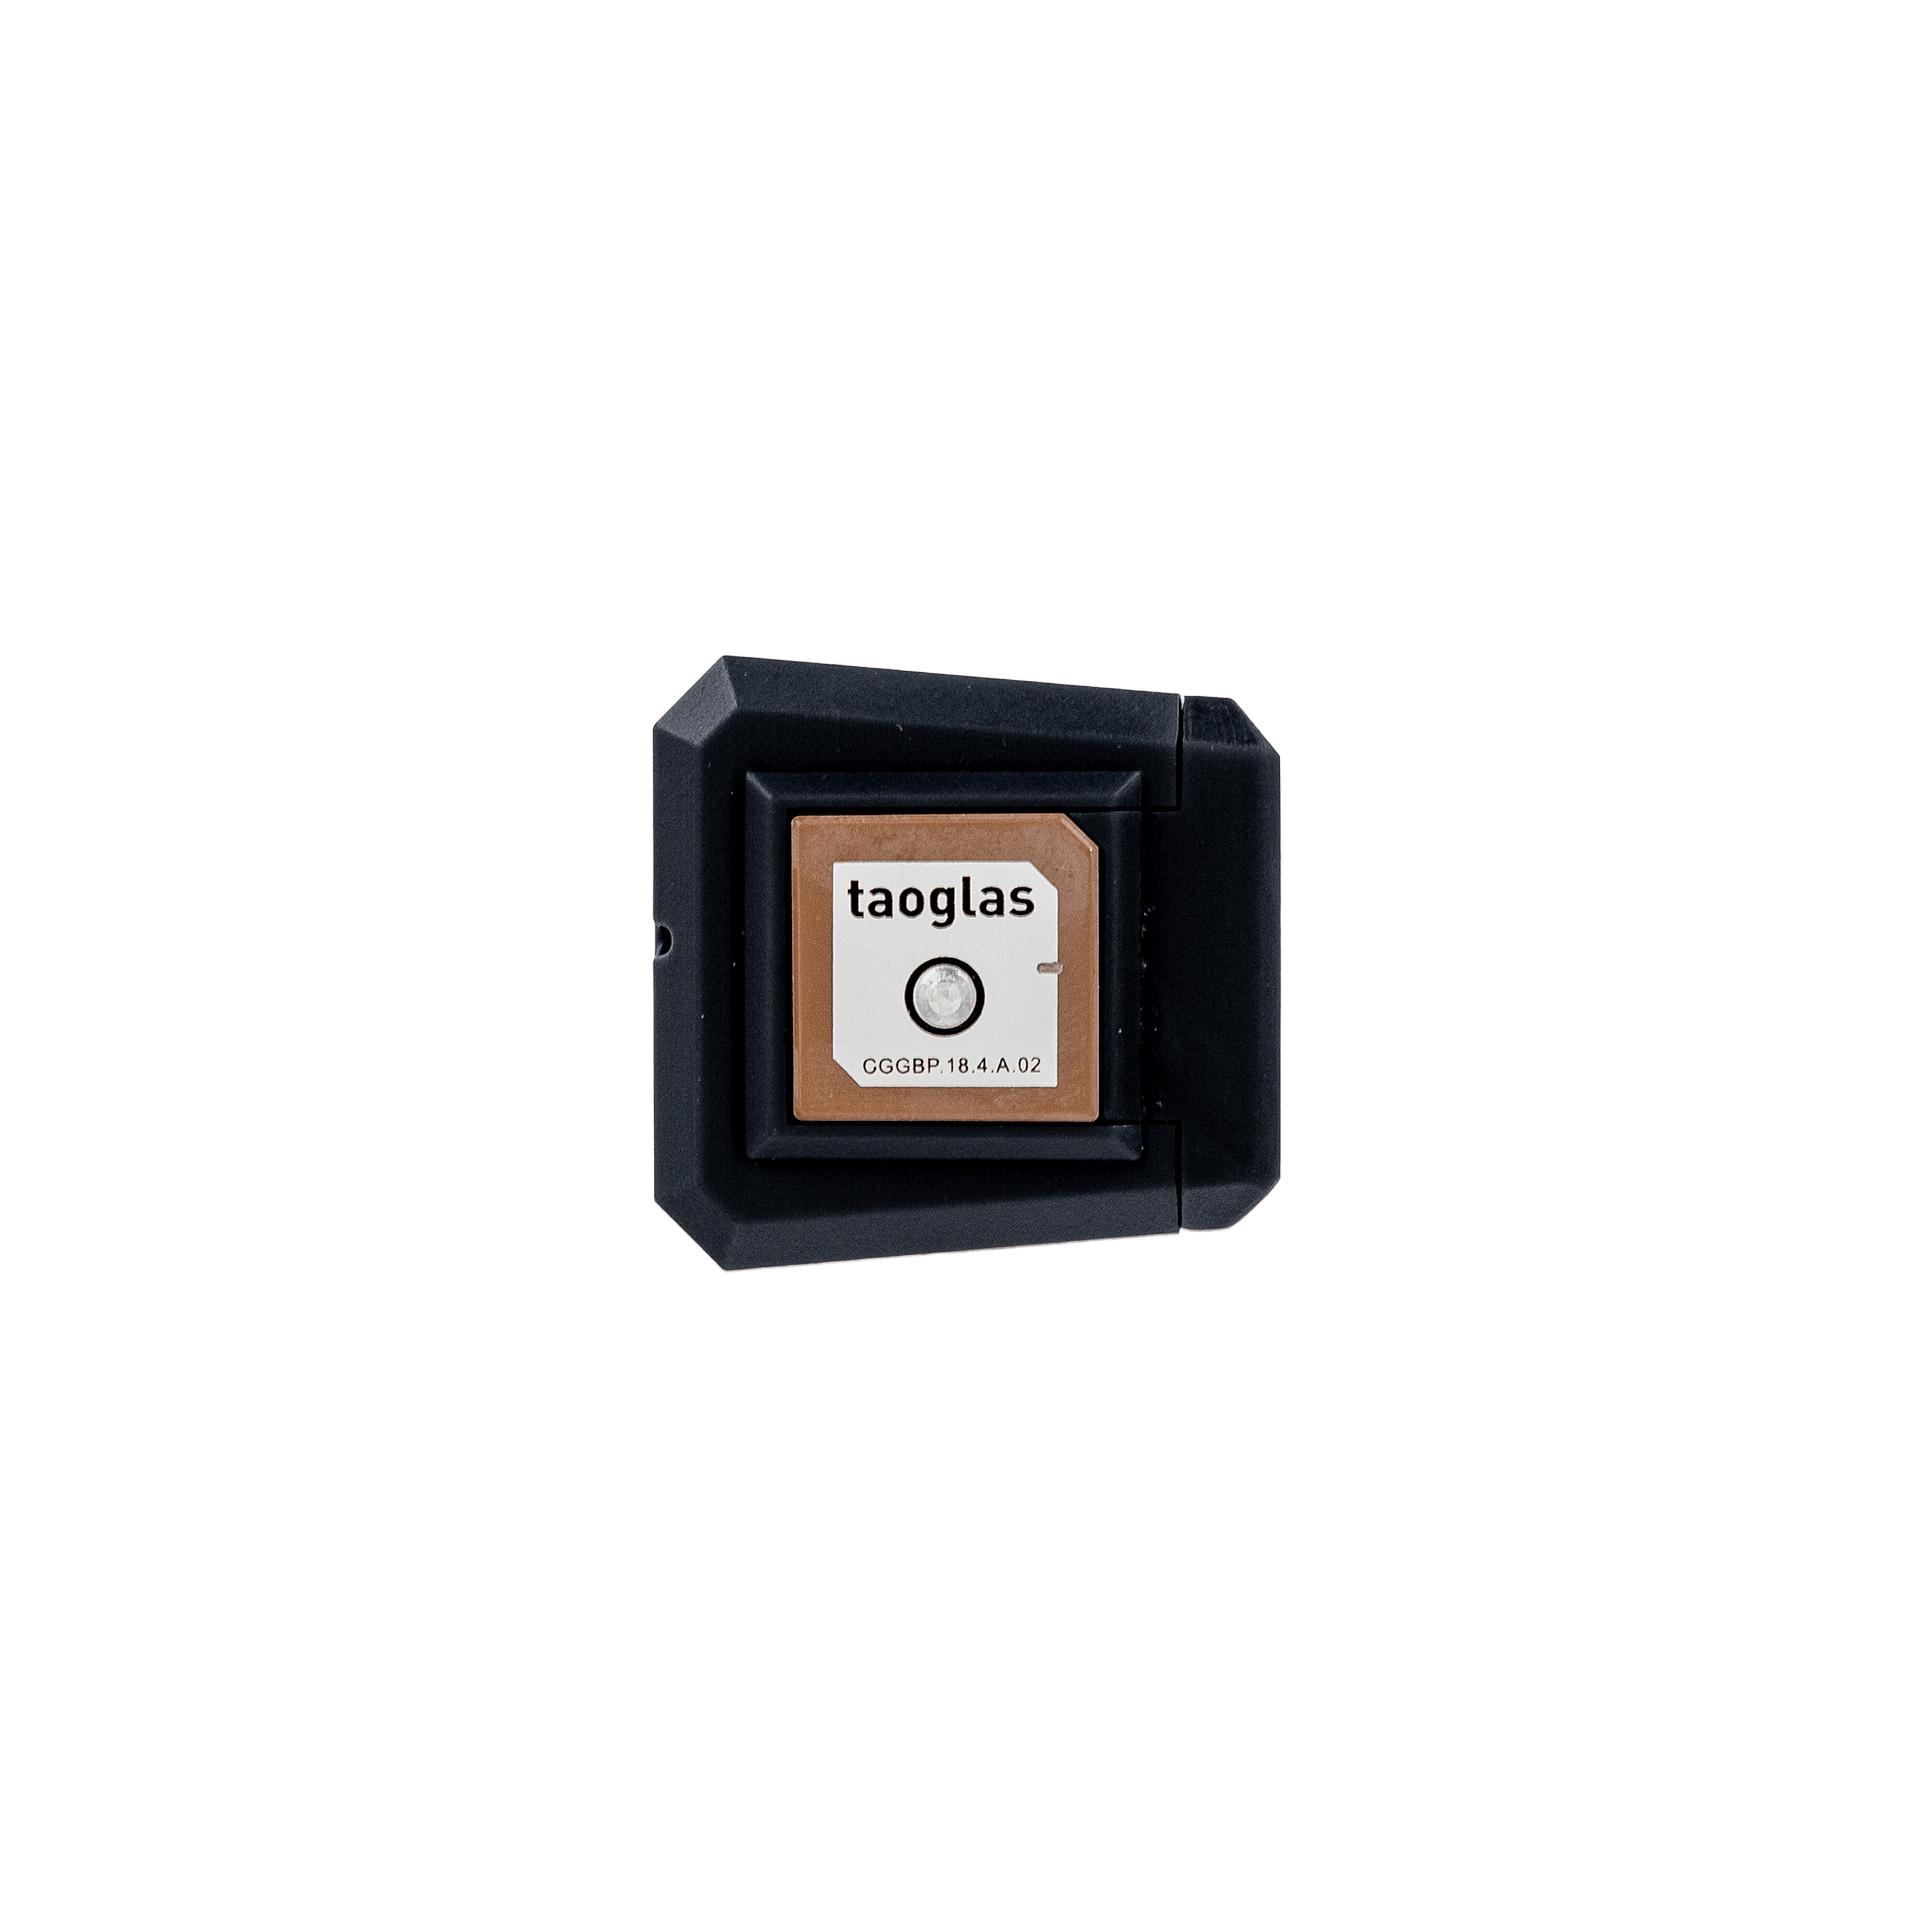 ModalAI, Inc. Accessory GPS uBlox M10 for Starling, Sentinel, m500 and Seeker